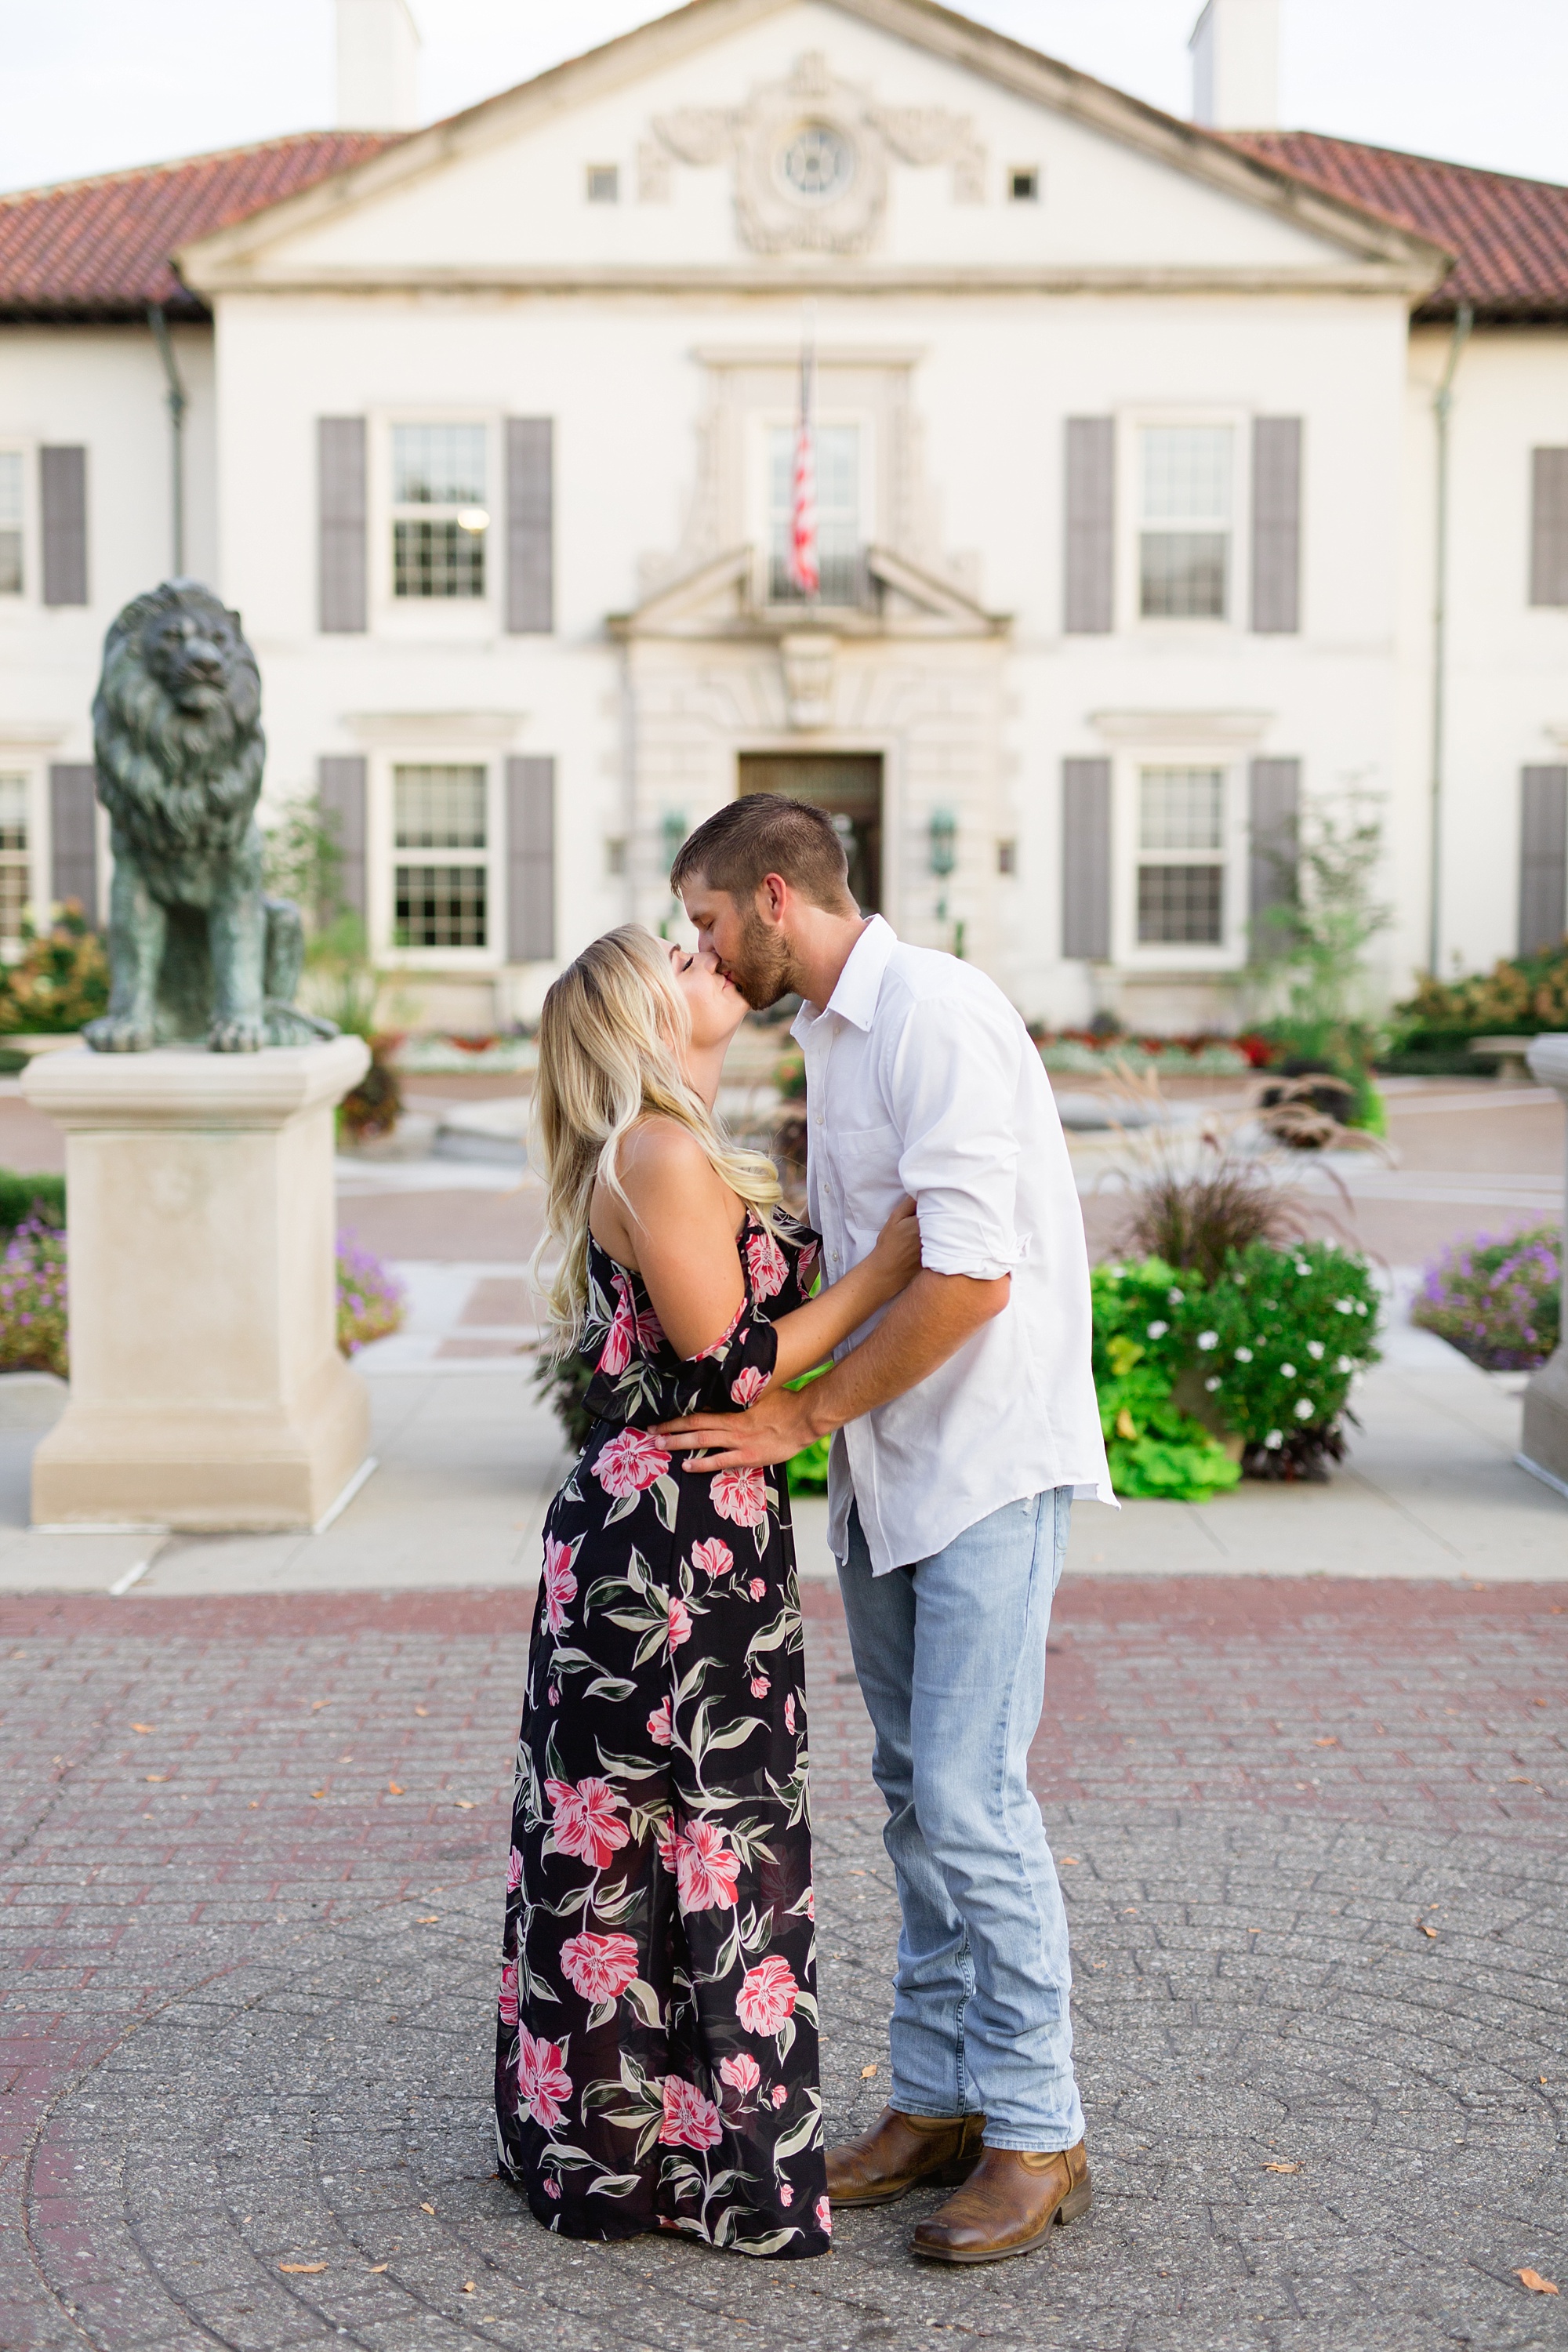 A classic September engagement session filled with blue waters and pretty flowers at The War Grosse Pointe War Memorial by Breanne Rochelle Photography.